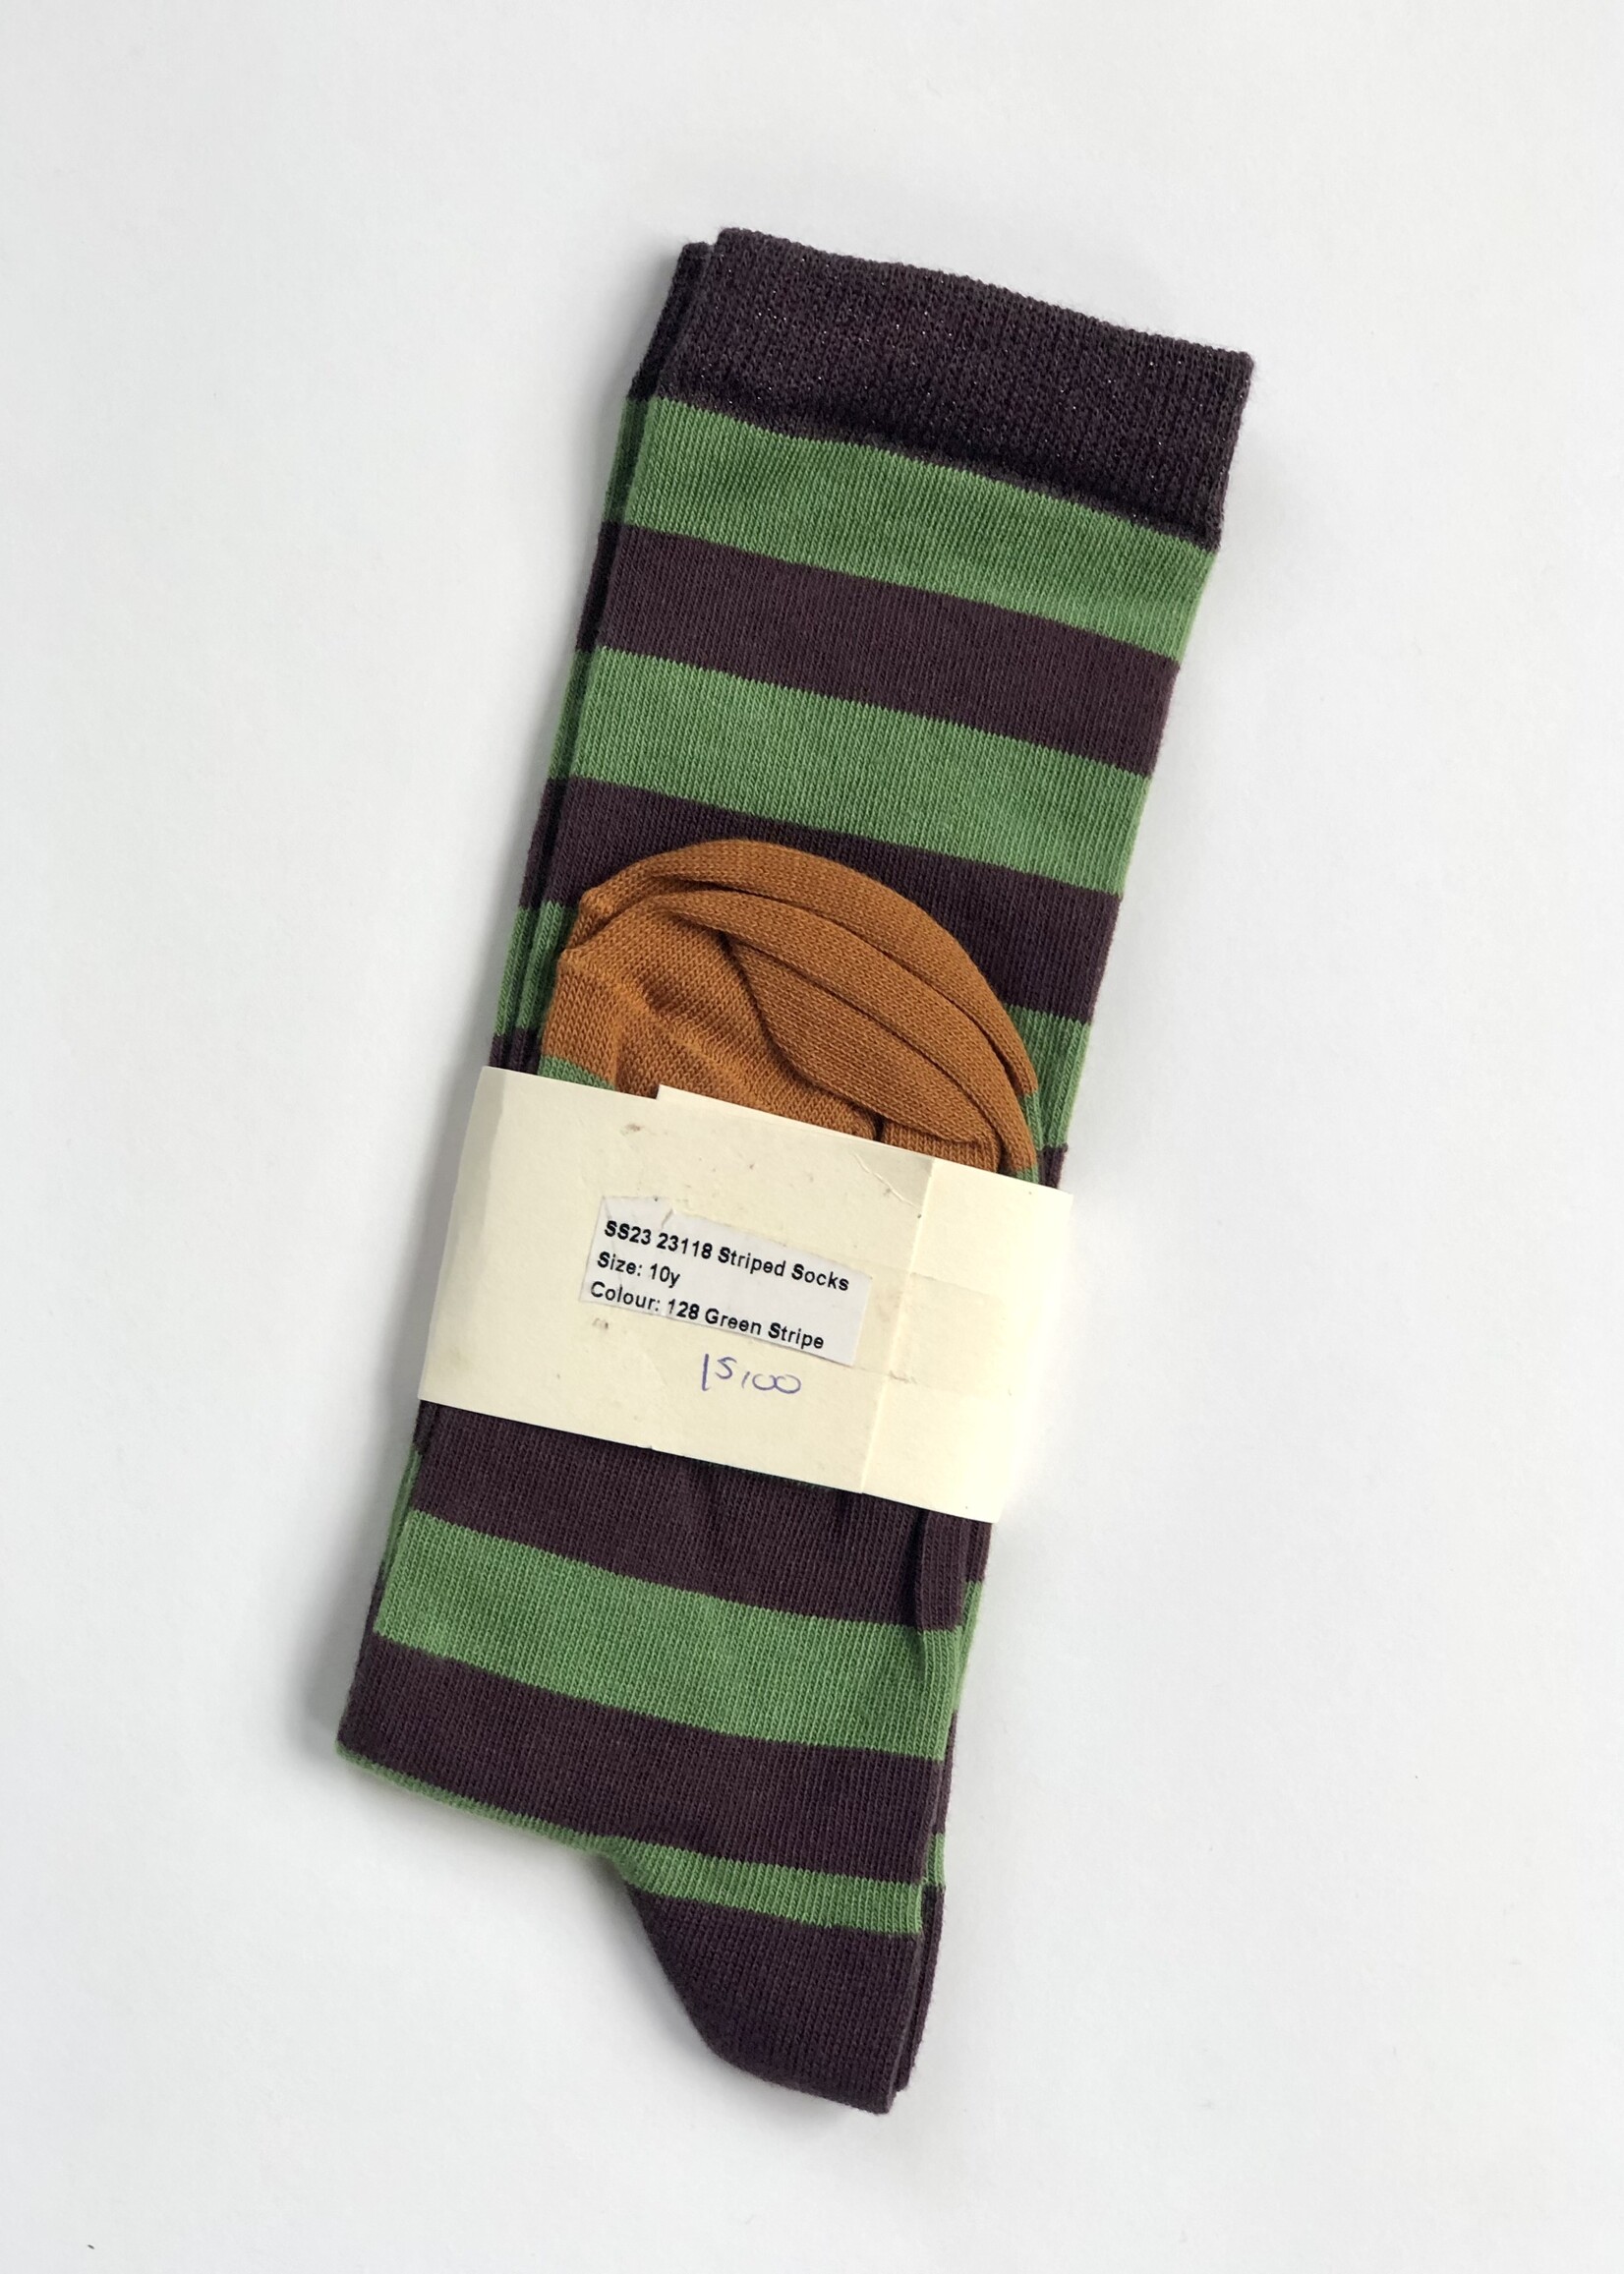 Long Live The Queen Green striped socks 10y